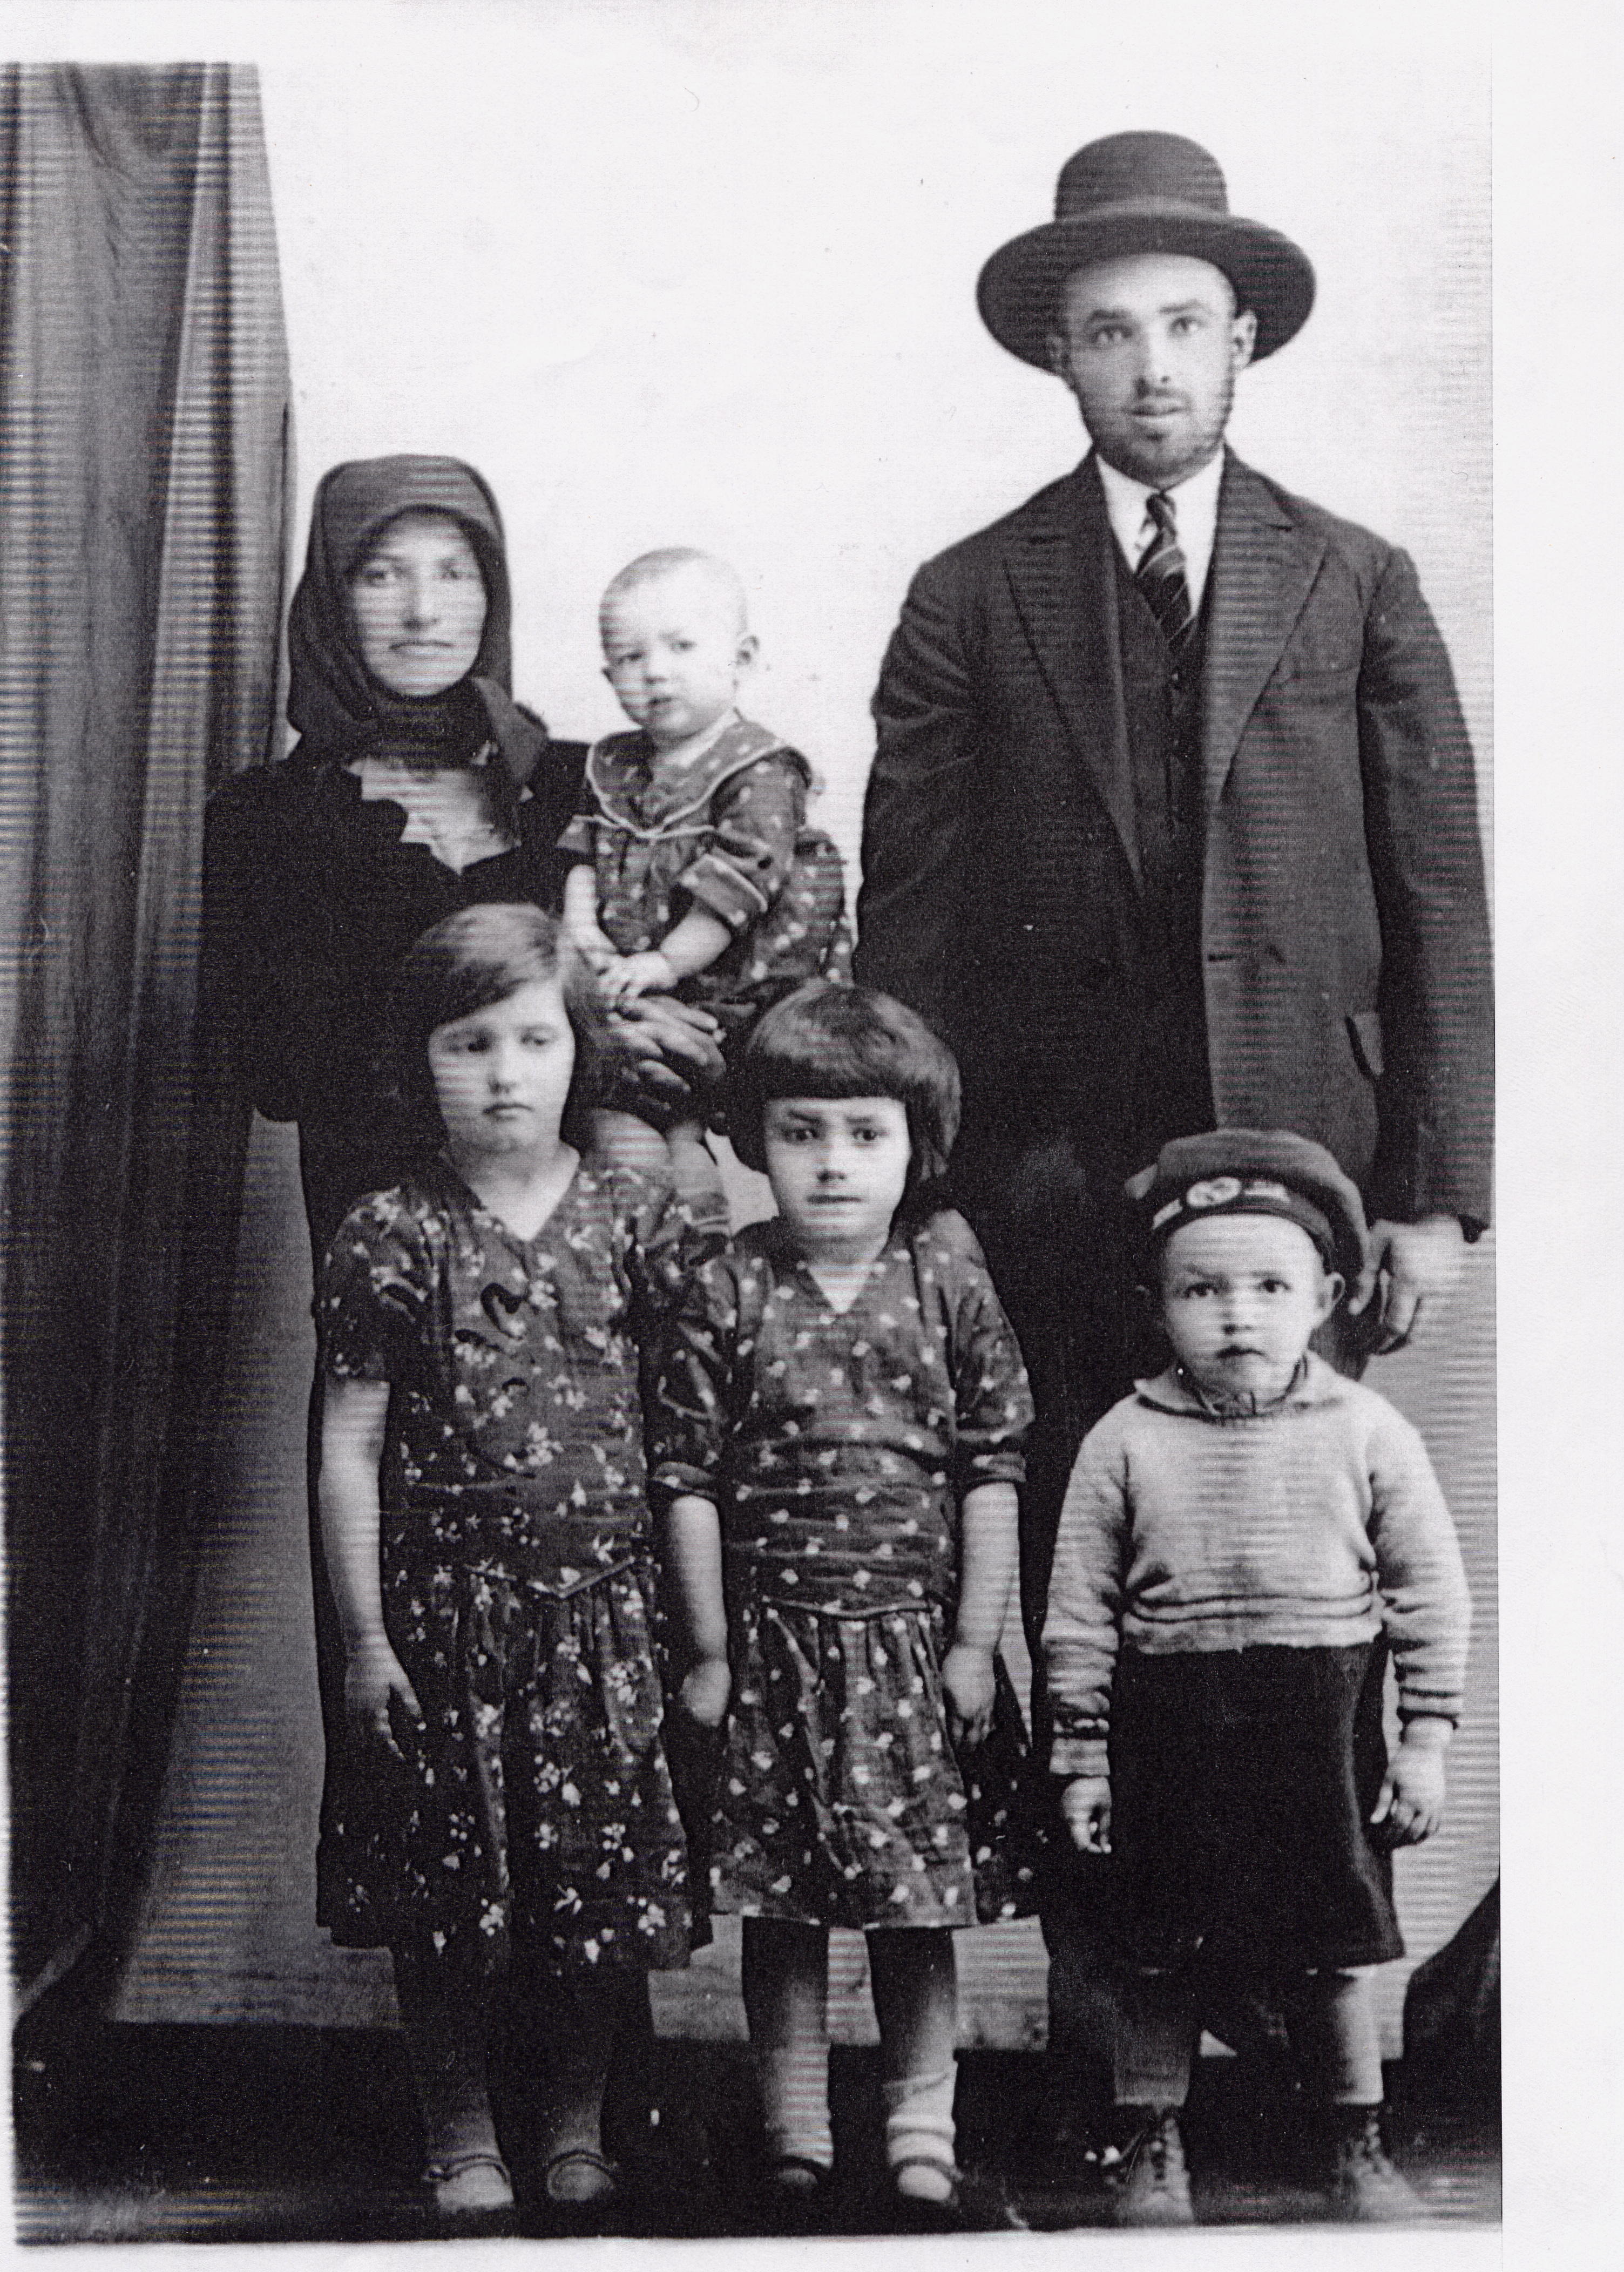 Moshe Gelb, his first wife, Esther, and their 4 kids. Esther and the kids died in the Holocaust.